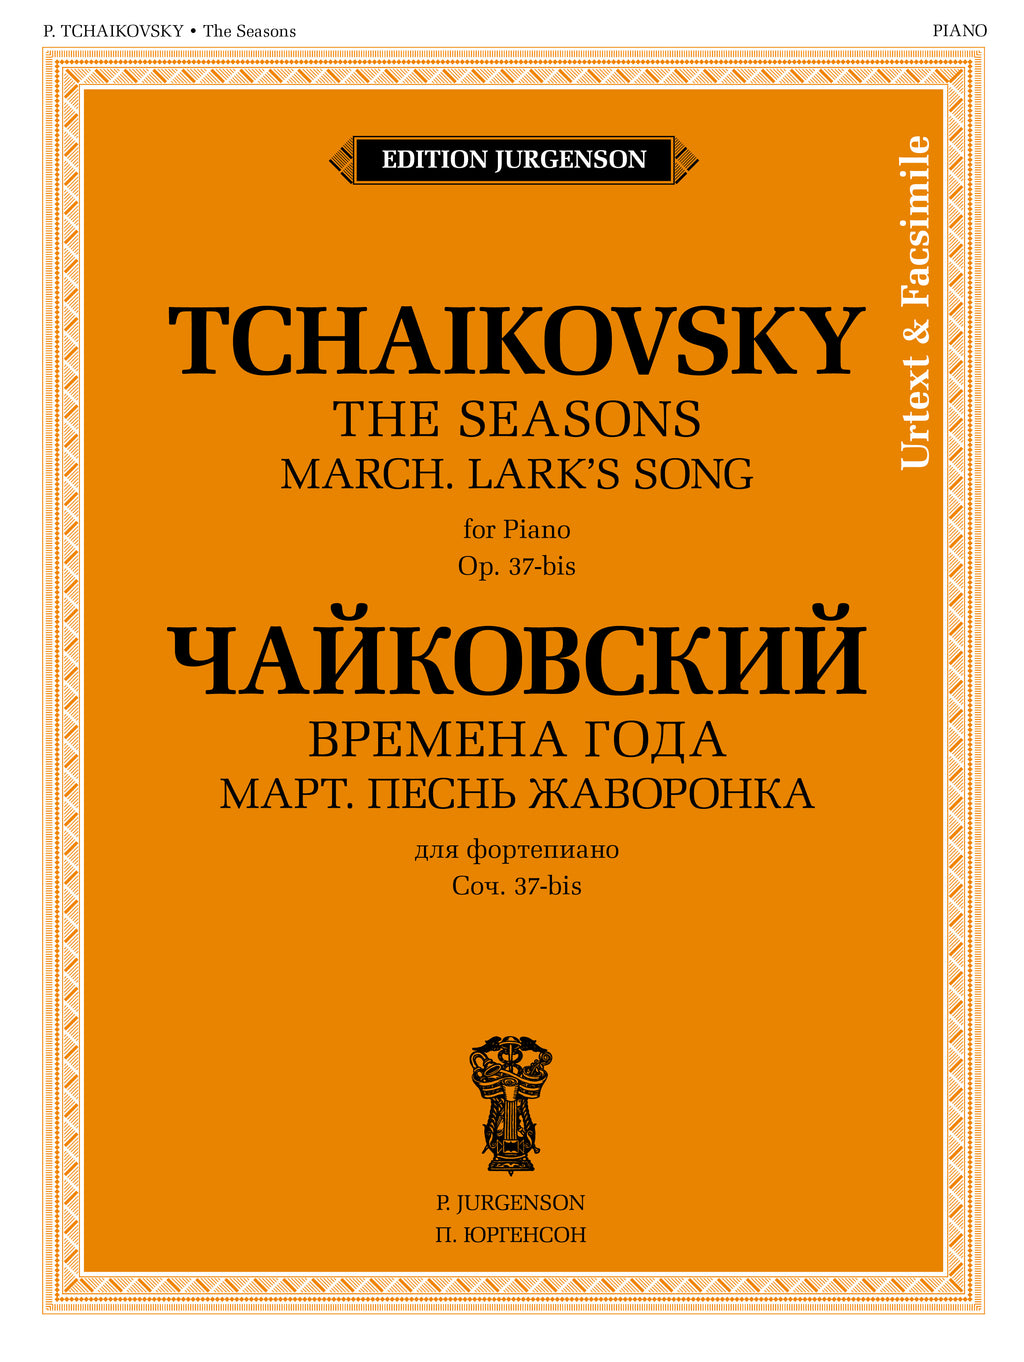 The Seasons: March. Lark's Song: Urtext, facsimile and ed. by Ya. Milstein and K. Sorokin